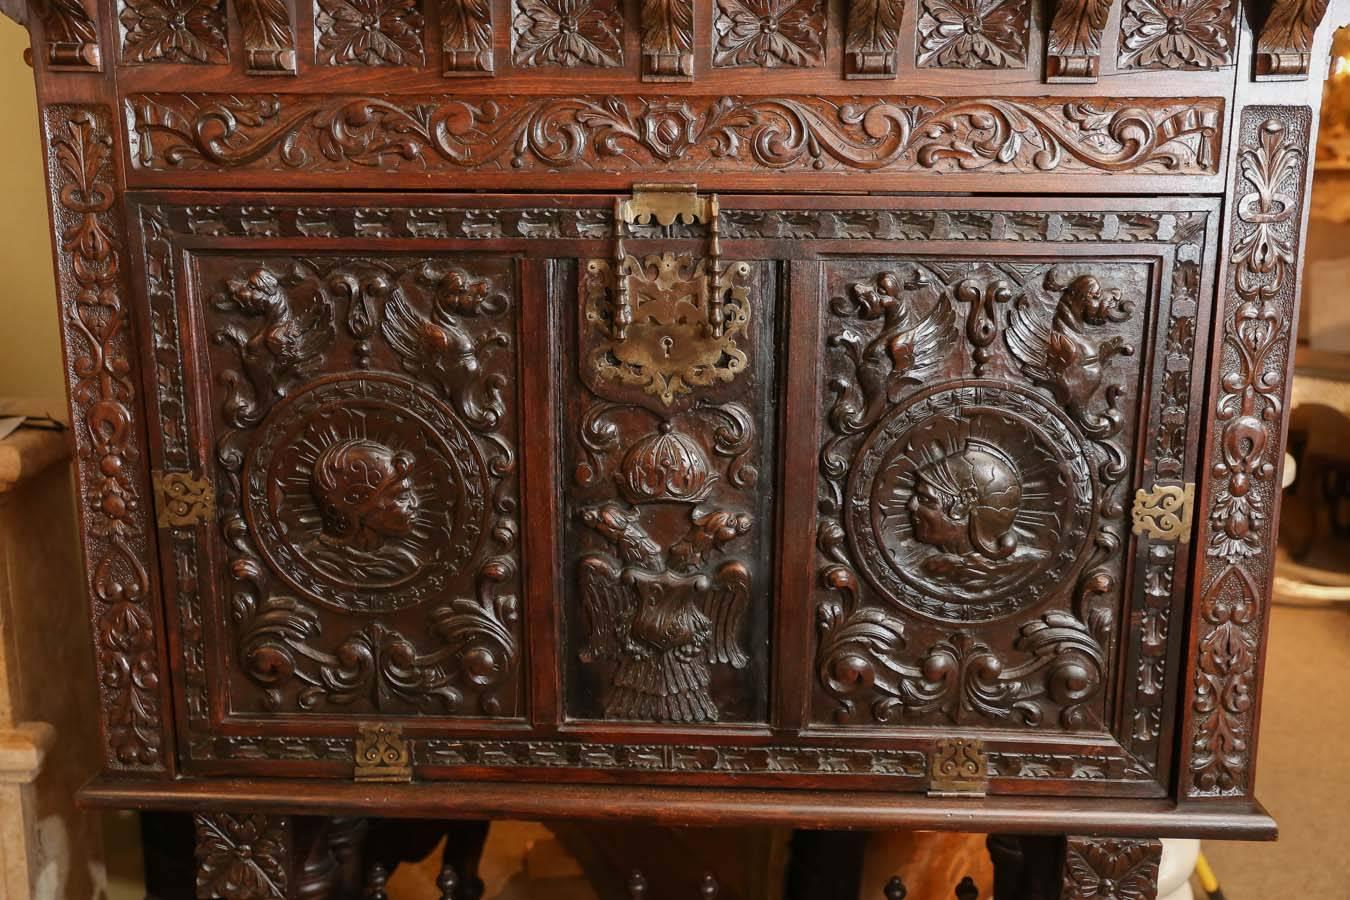 Antique Spanish desk made of dark walnut with extensive carvings.
Raised on carved legs in a barley twist pattern. The front door of the
desk is carved with two heads in an elaborate design. The door drops
down to an opening which exposes the